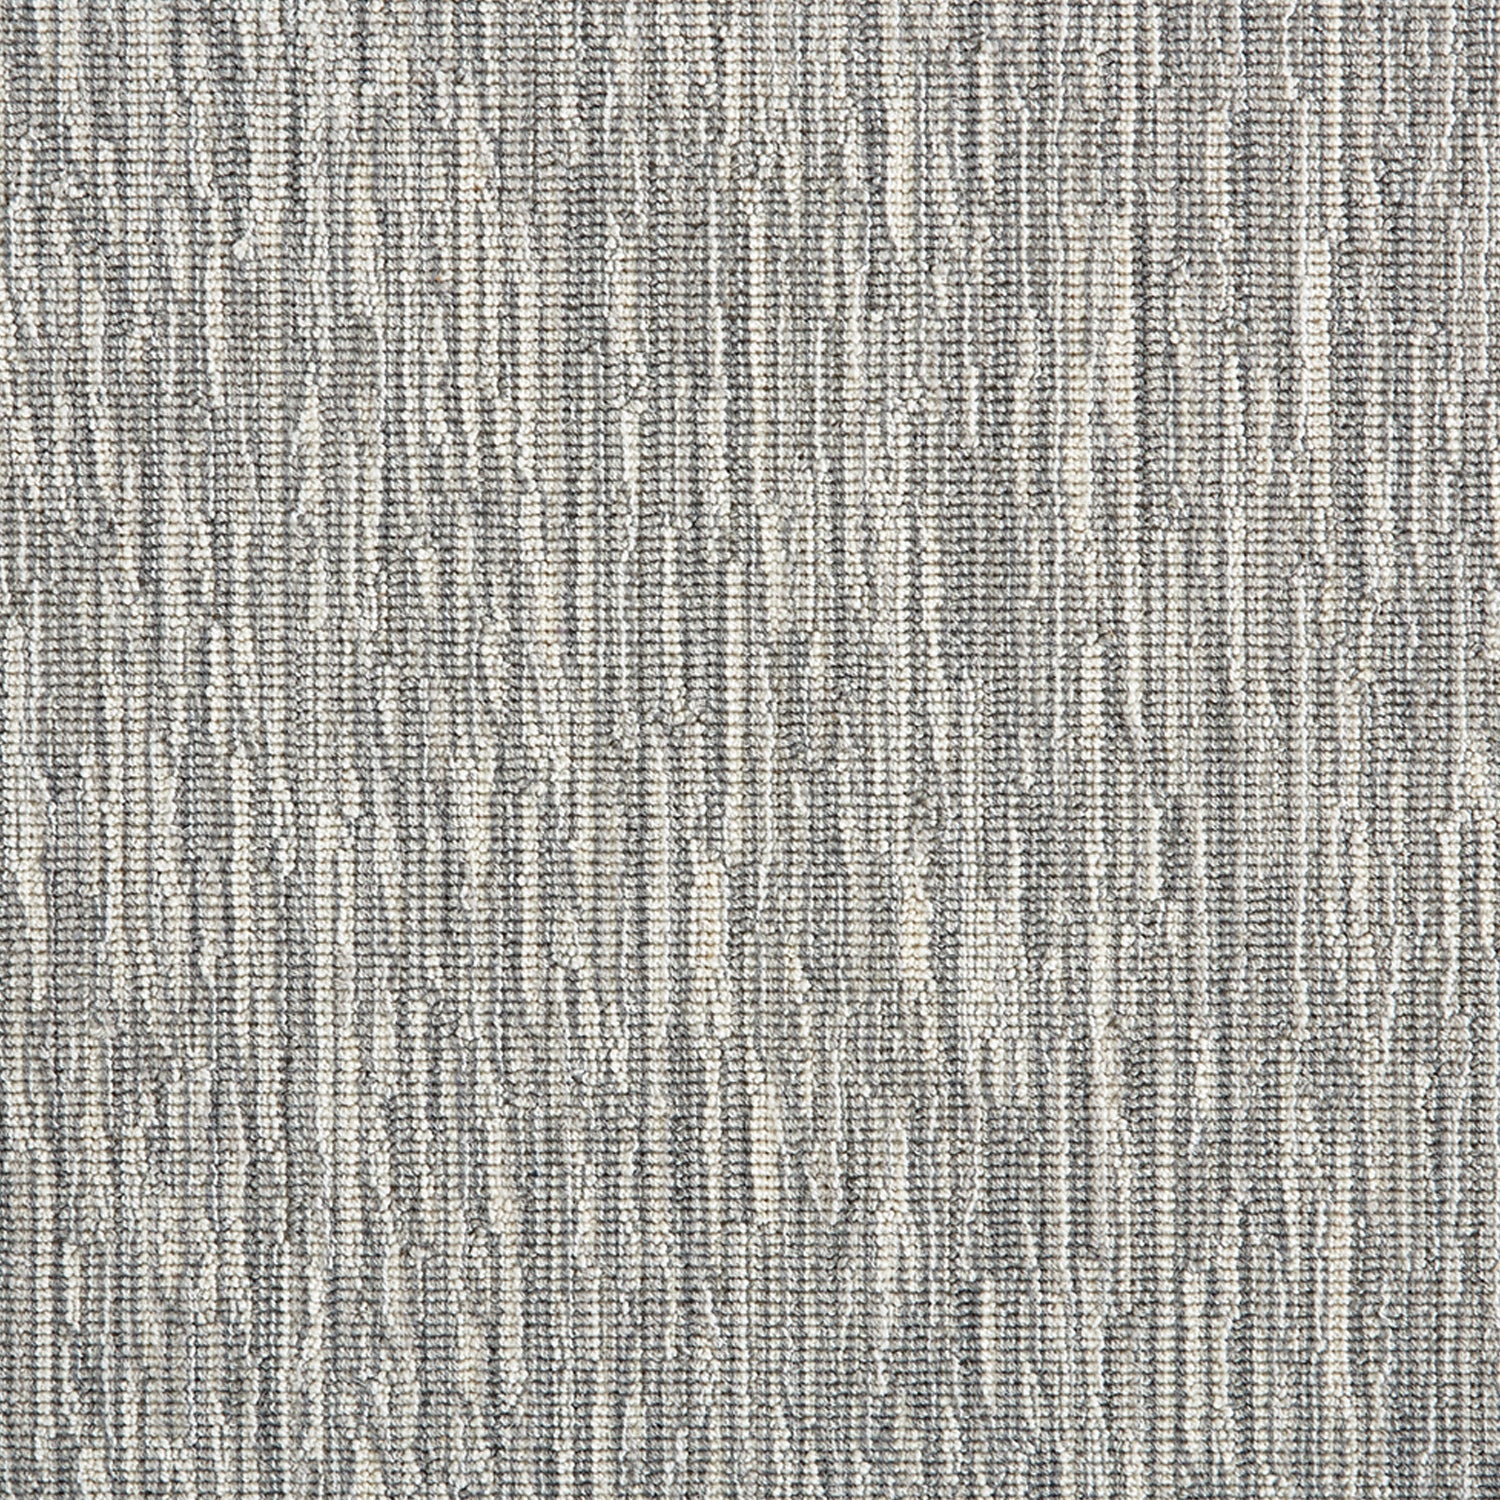 Wool-blend broadloom carpet swatch in a mottled stripe print in shades of gray, cream and sable.